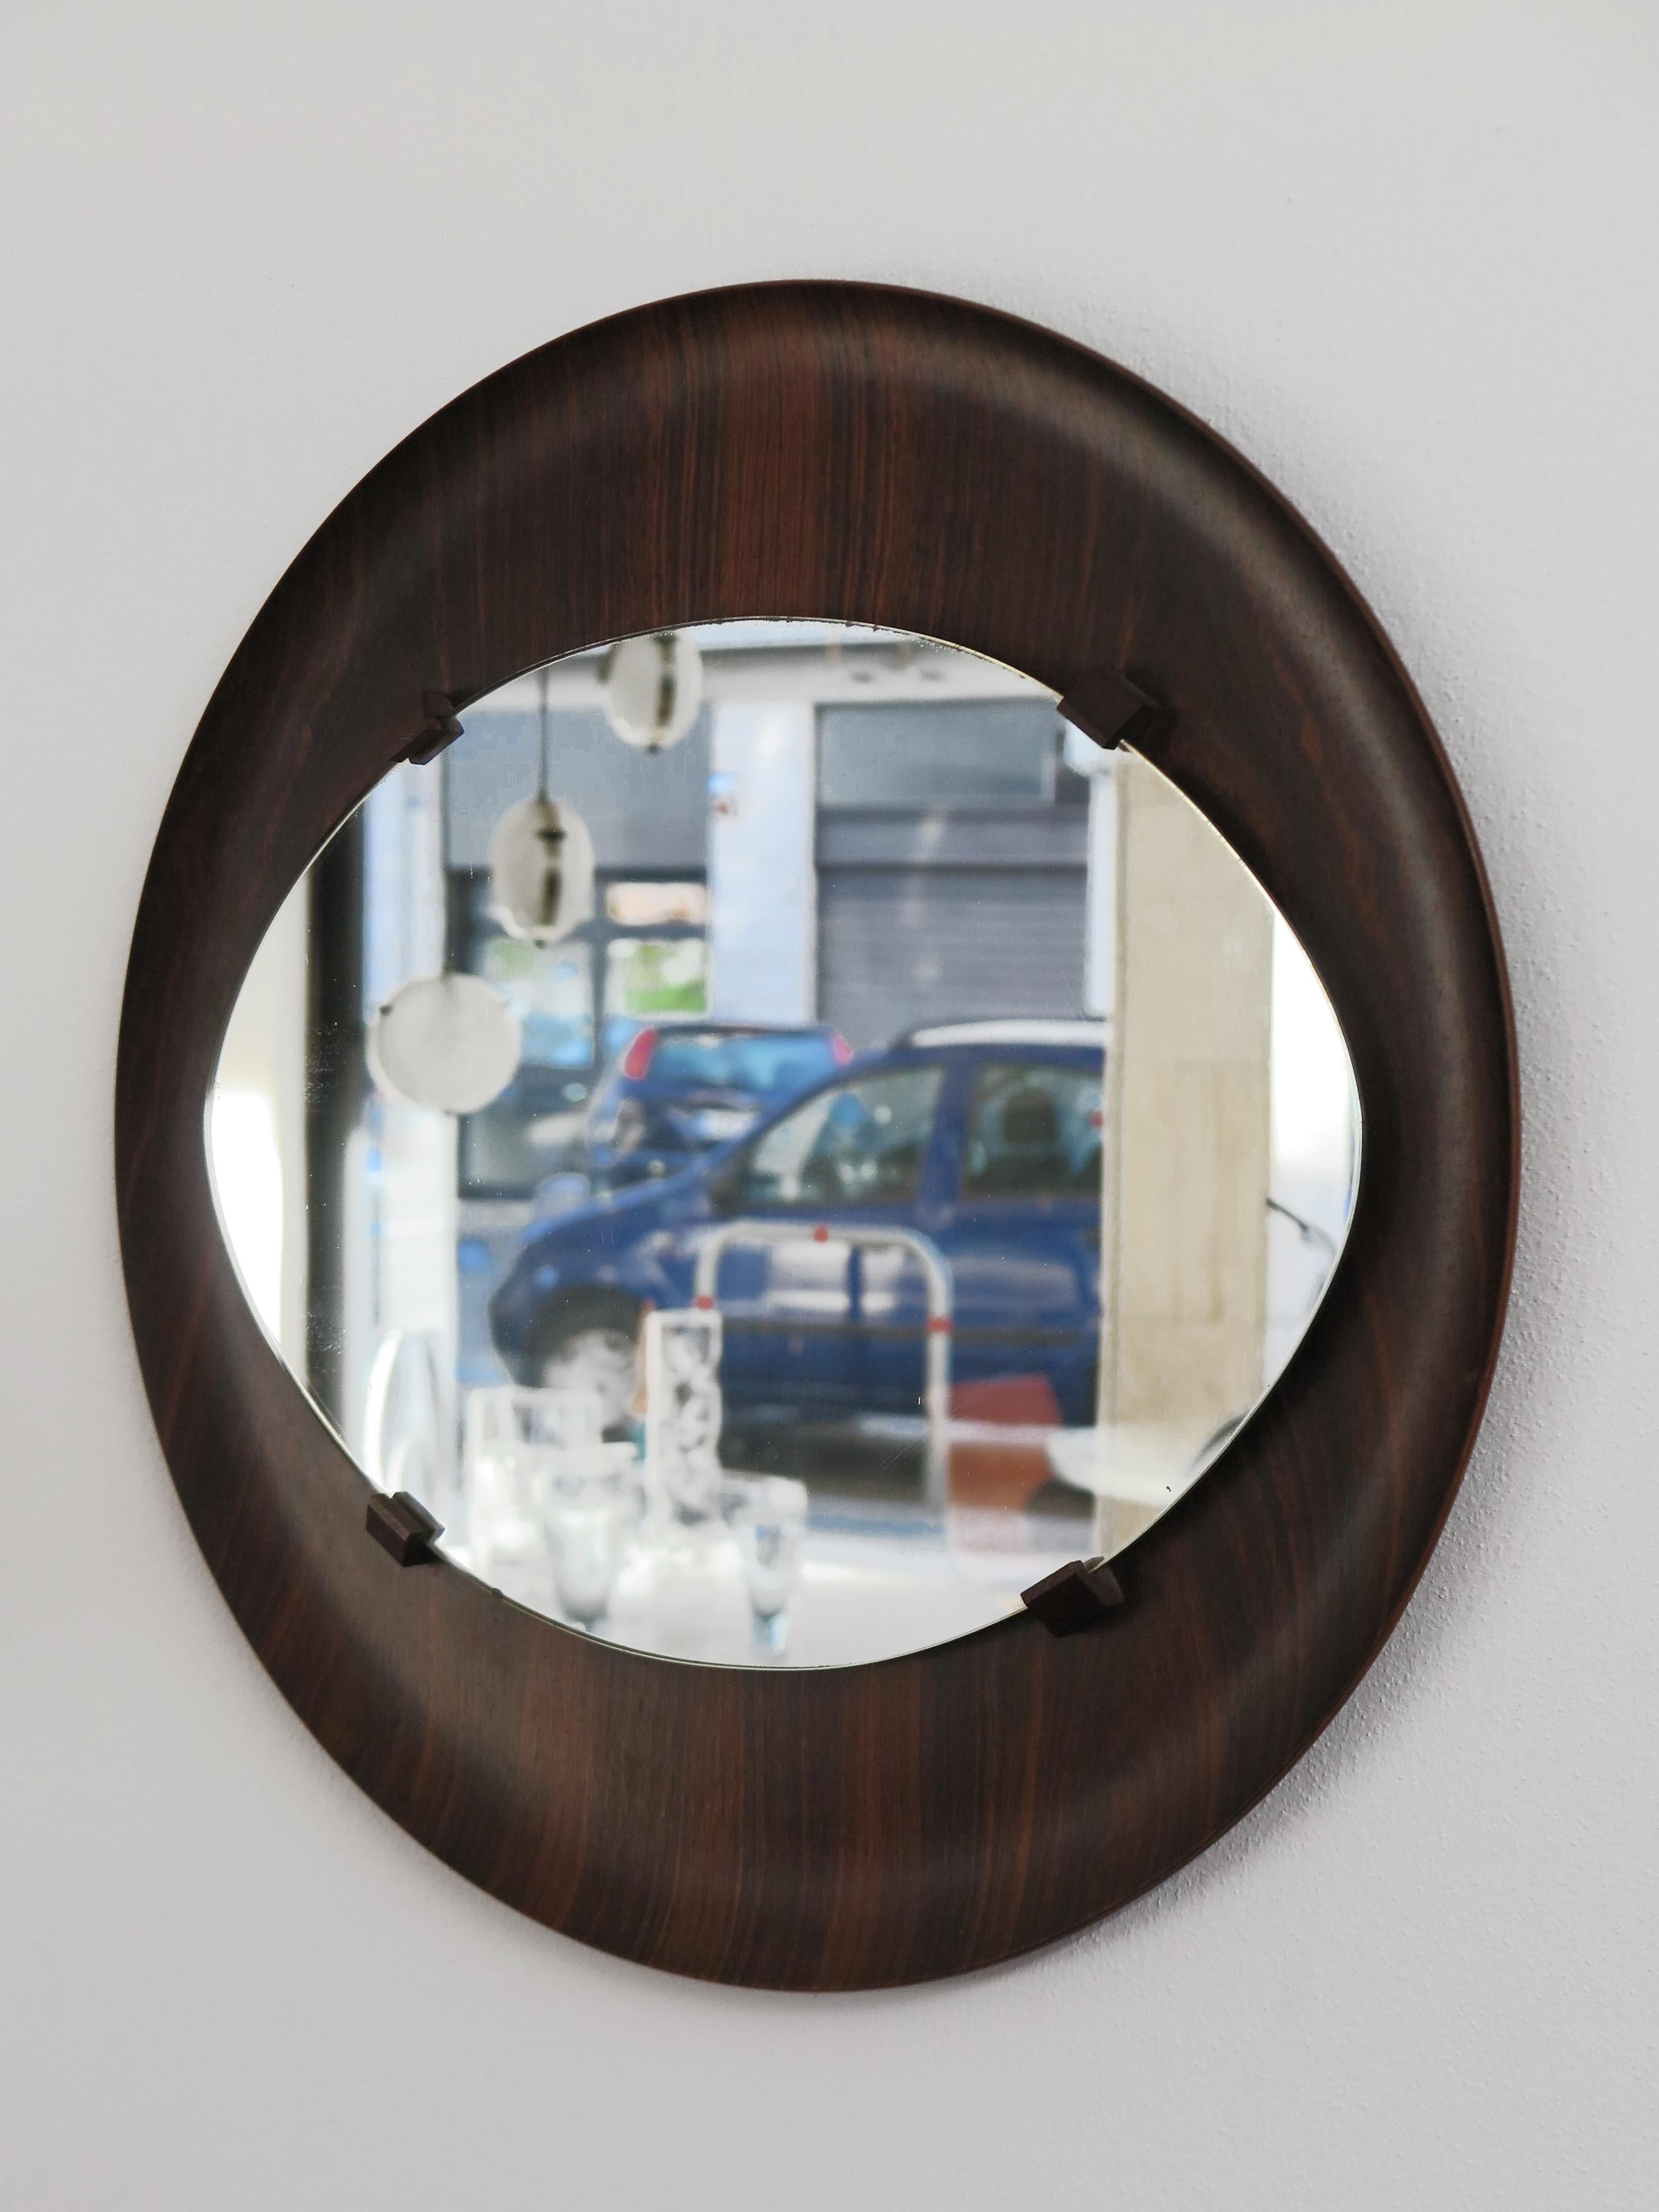 Italian midcentury wall mirror with circular frame in curved dark wood and mirrored glass, 1960s

Please note that the item is original of the period and this shows normal signs of age and use.